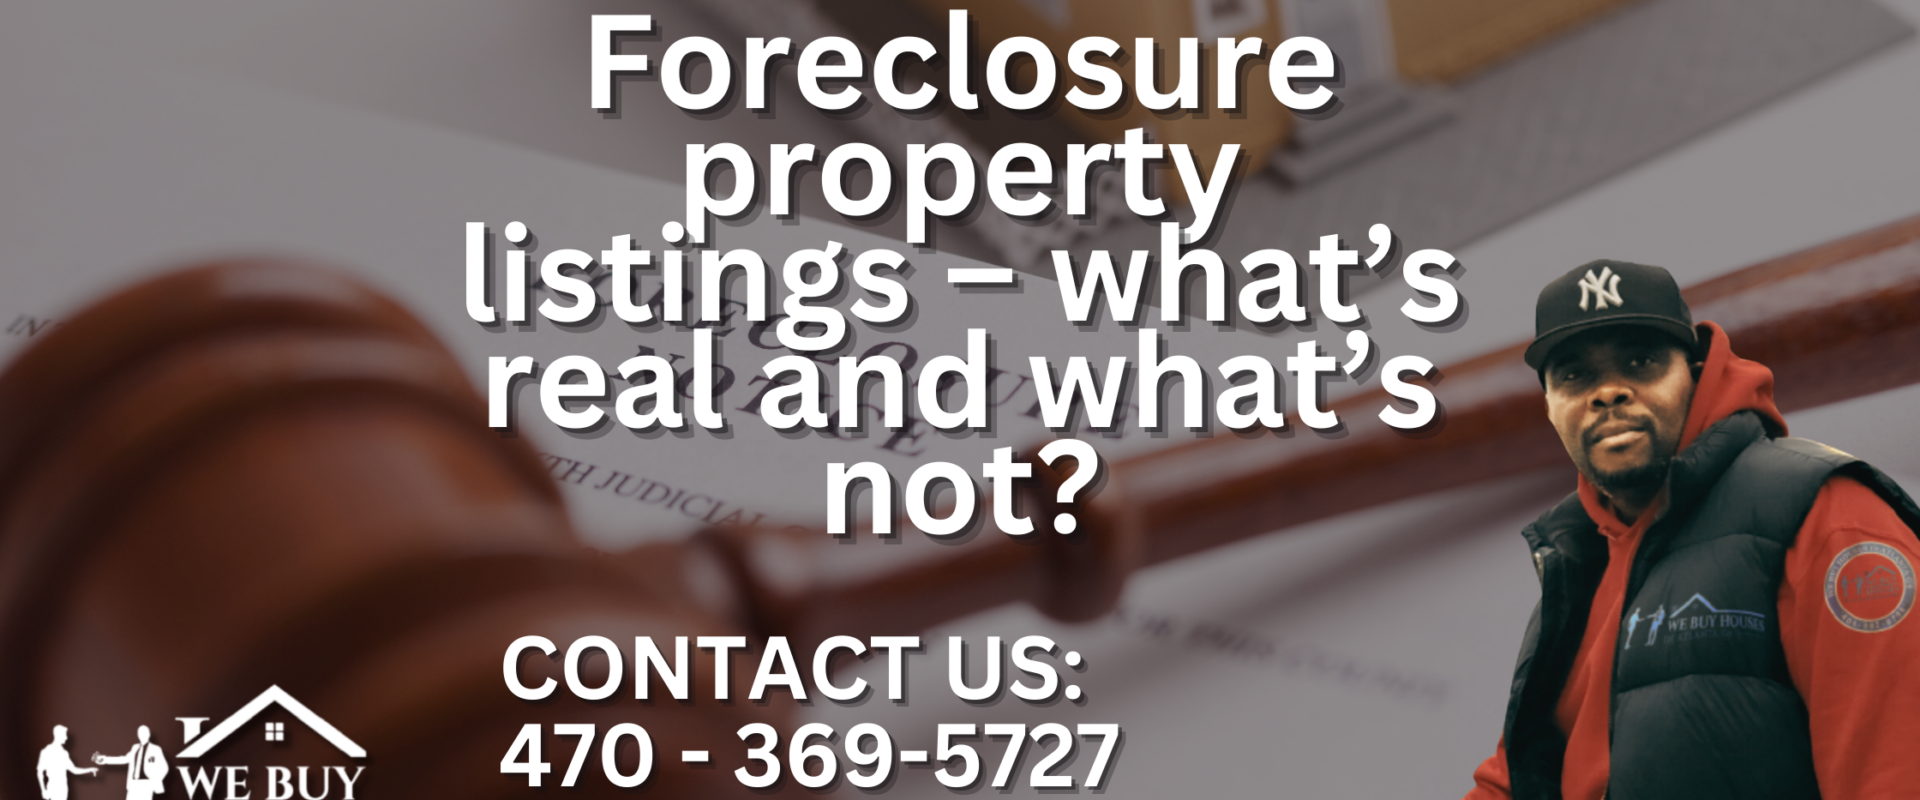 Foreclosure-property-listings-–-whats-real-and-whats-not